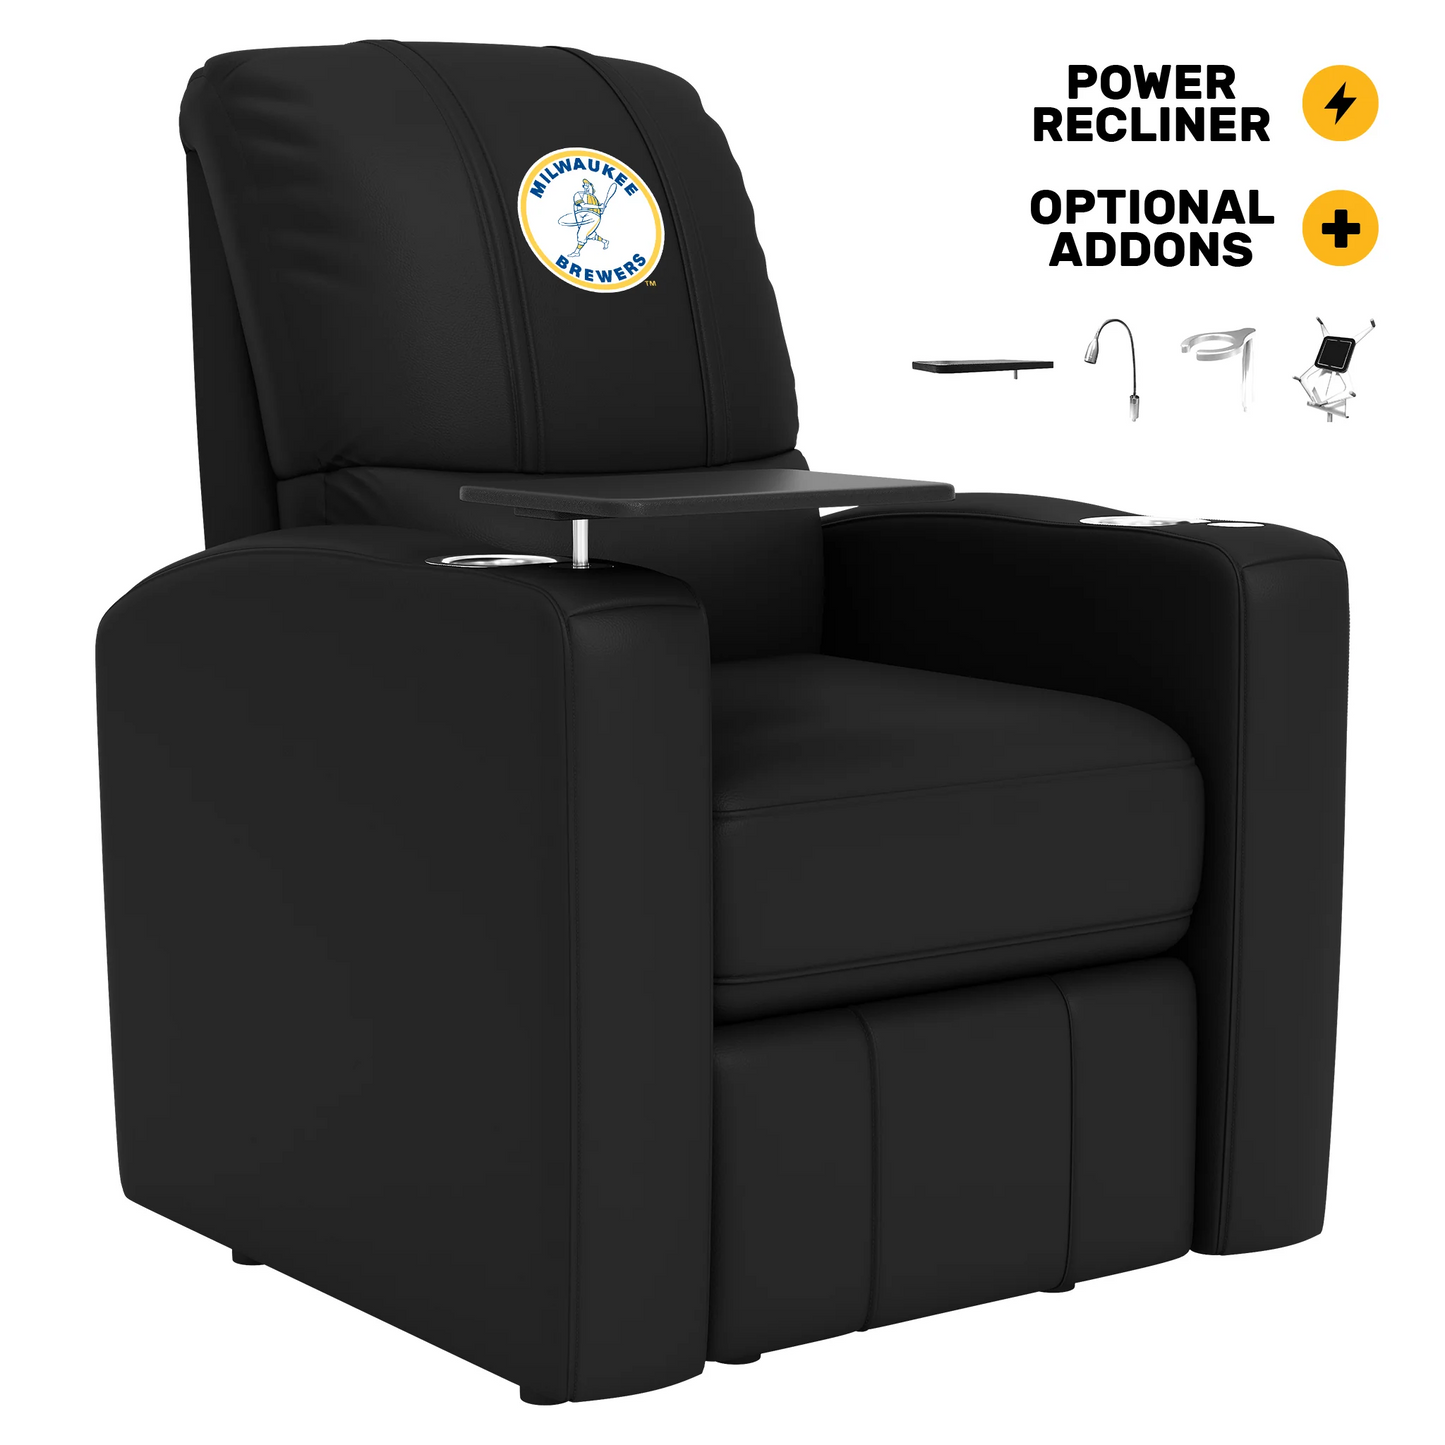 MILWAUKEE BREWERS STEALTH POWER RECLINER WITH COOPERSTOWN LOGO